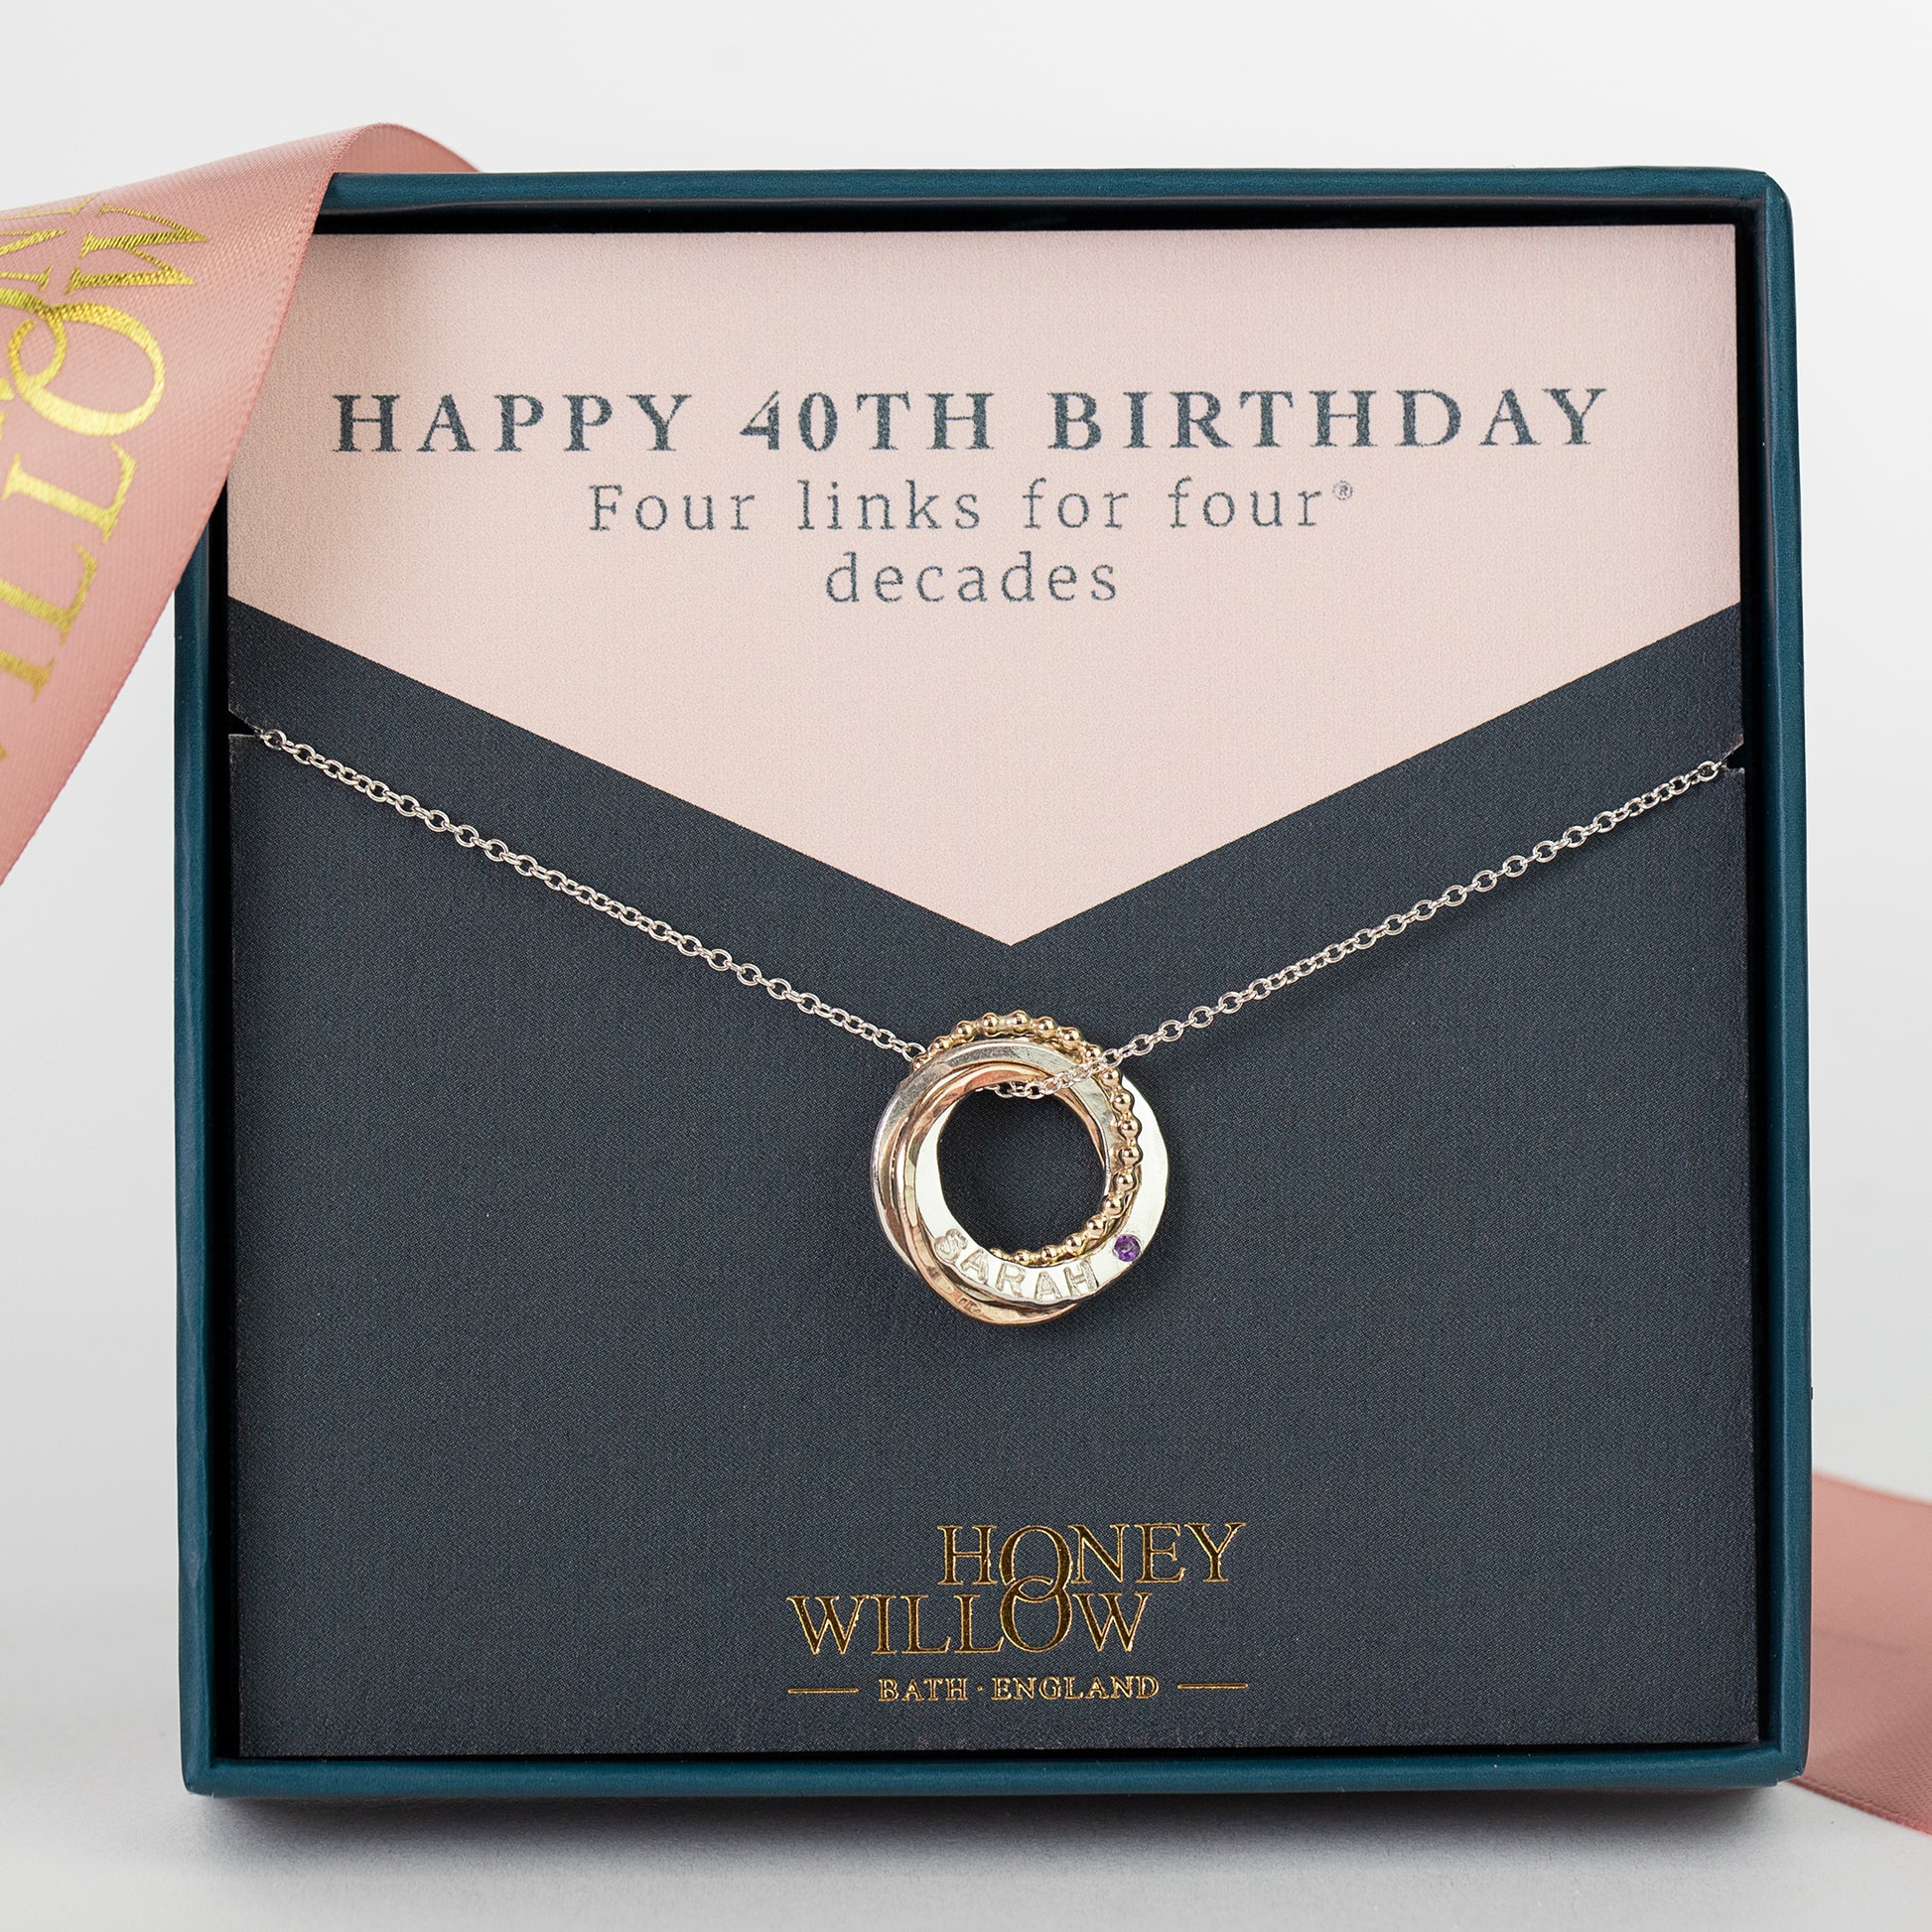 Personalised 40th Birthday Birthstone Necklace -  The Original 4 Links for 4 Decades - 9kt Gold - Rose Gold - Silver